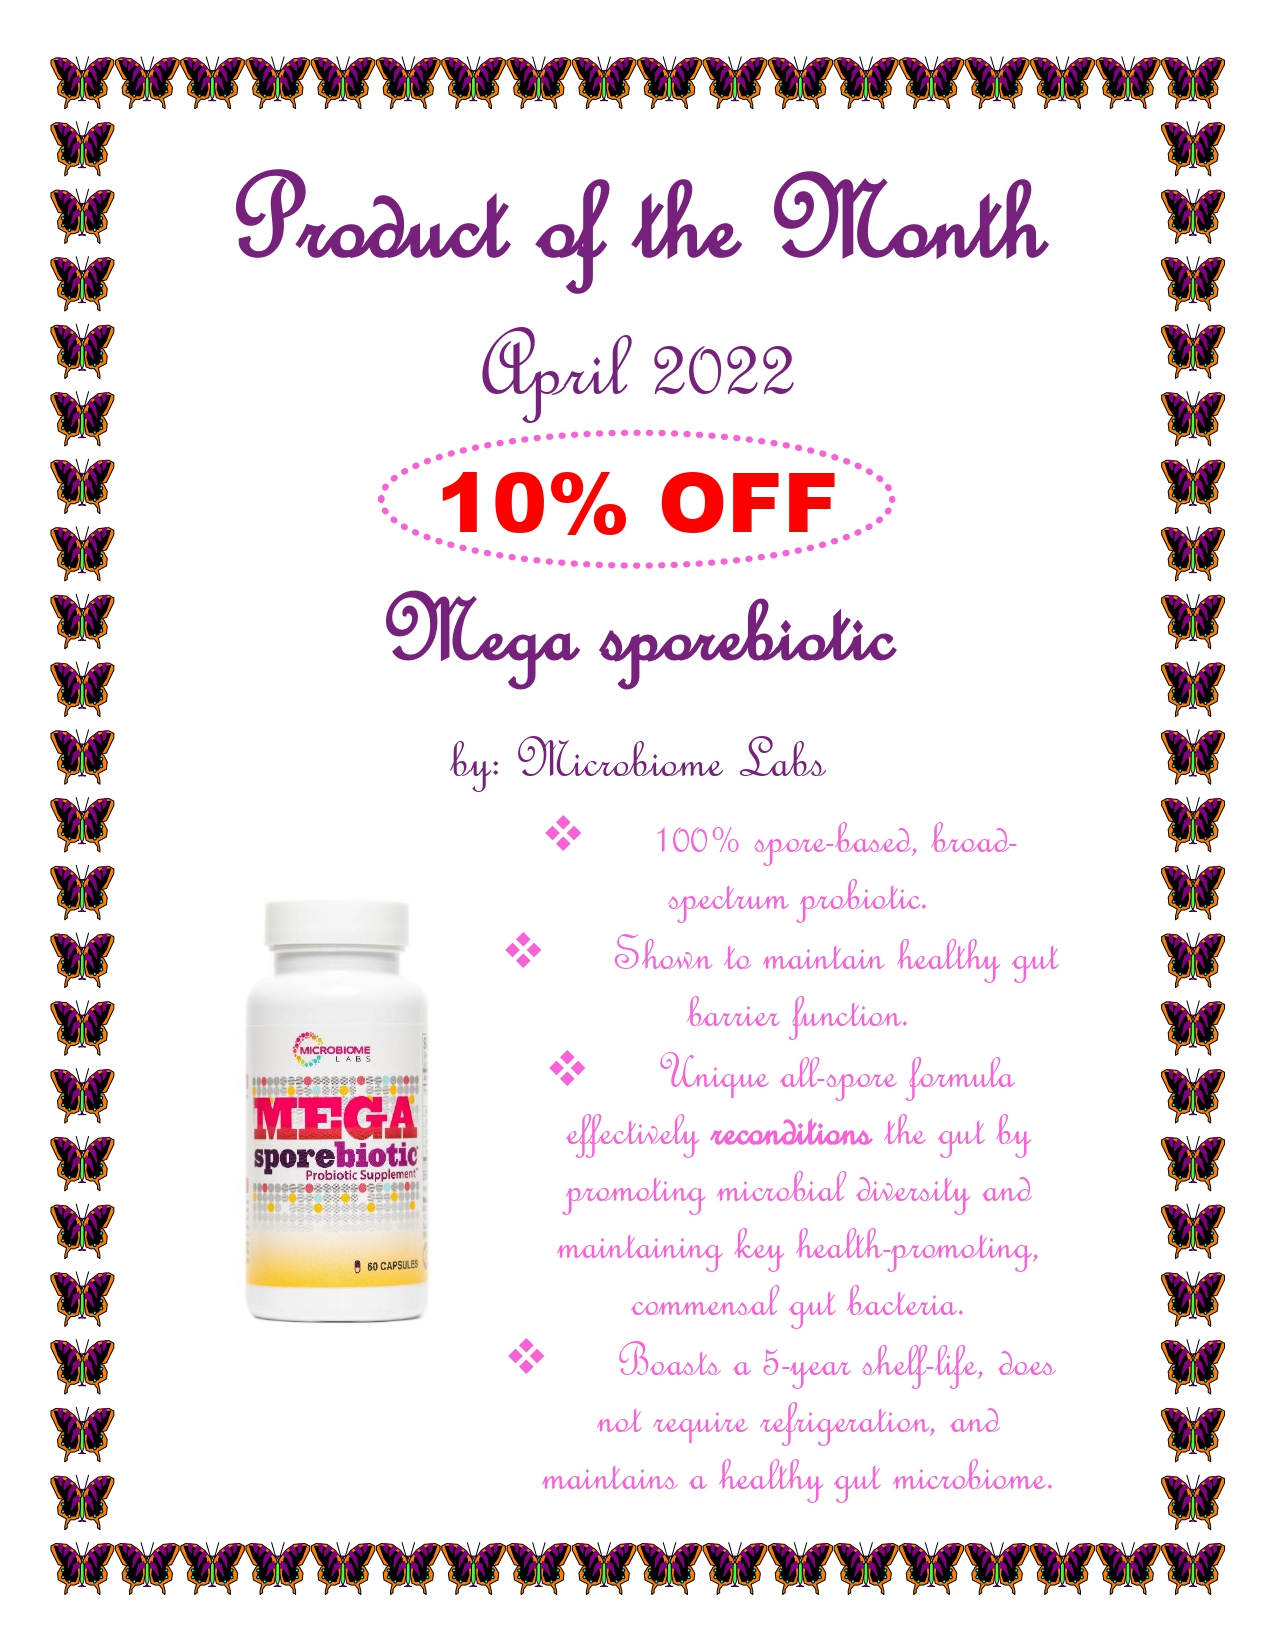 February Product of the Month